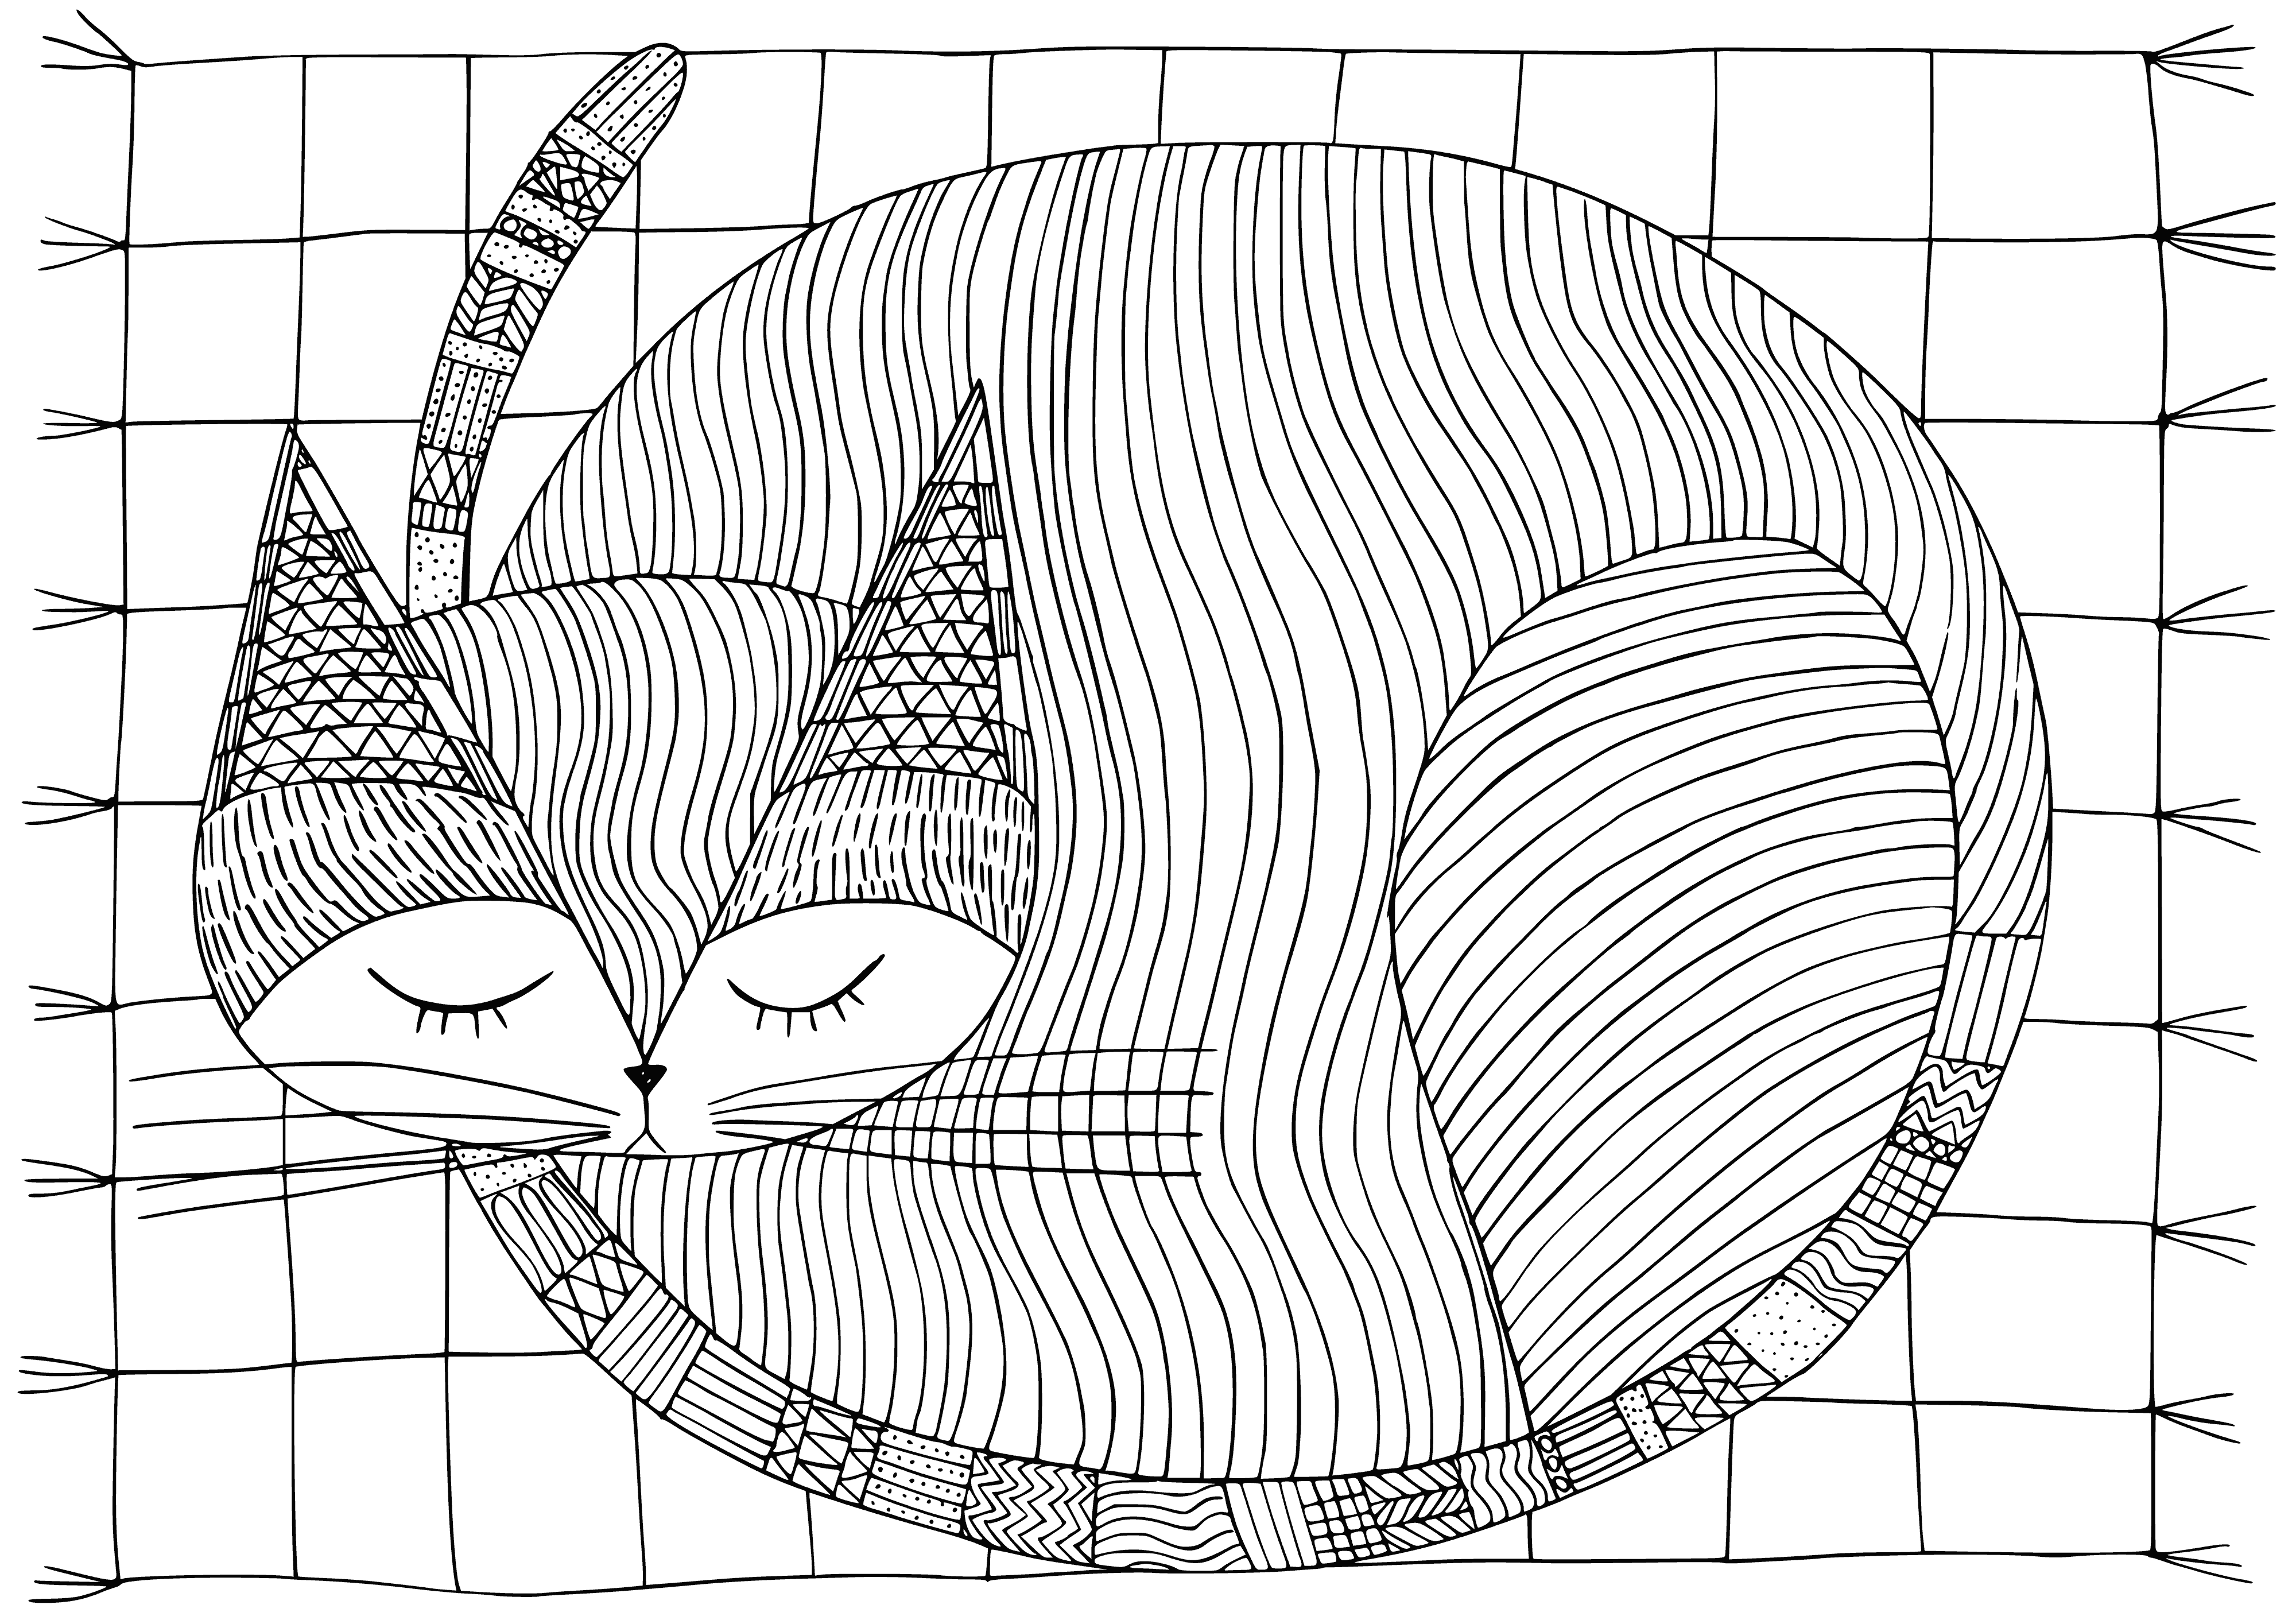 coloring page: Sleeping cat, warm and cozy, totally relaxed. Calming and soothing feeling.